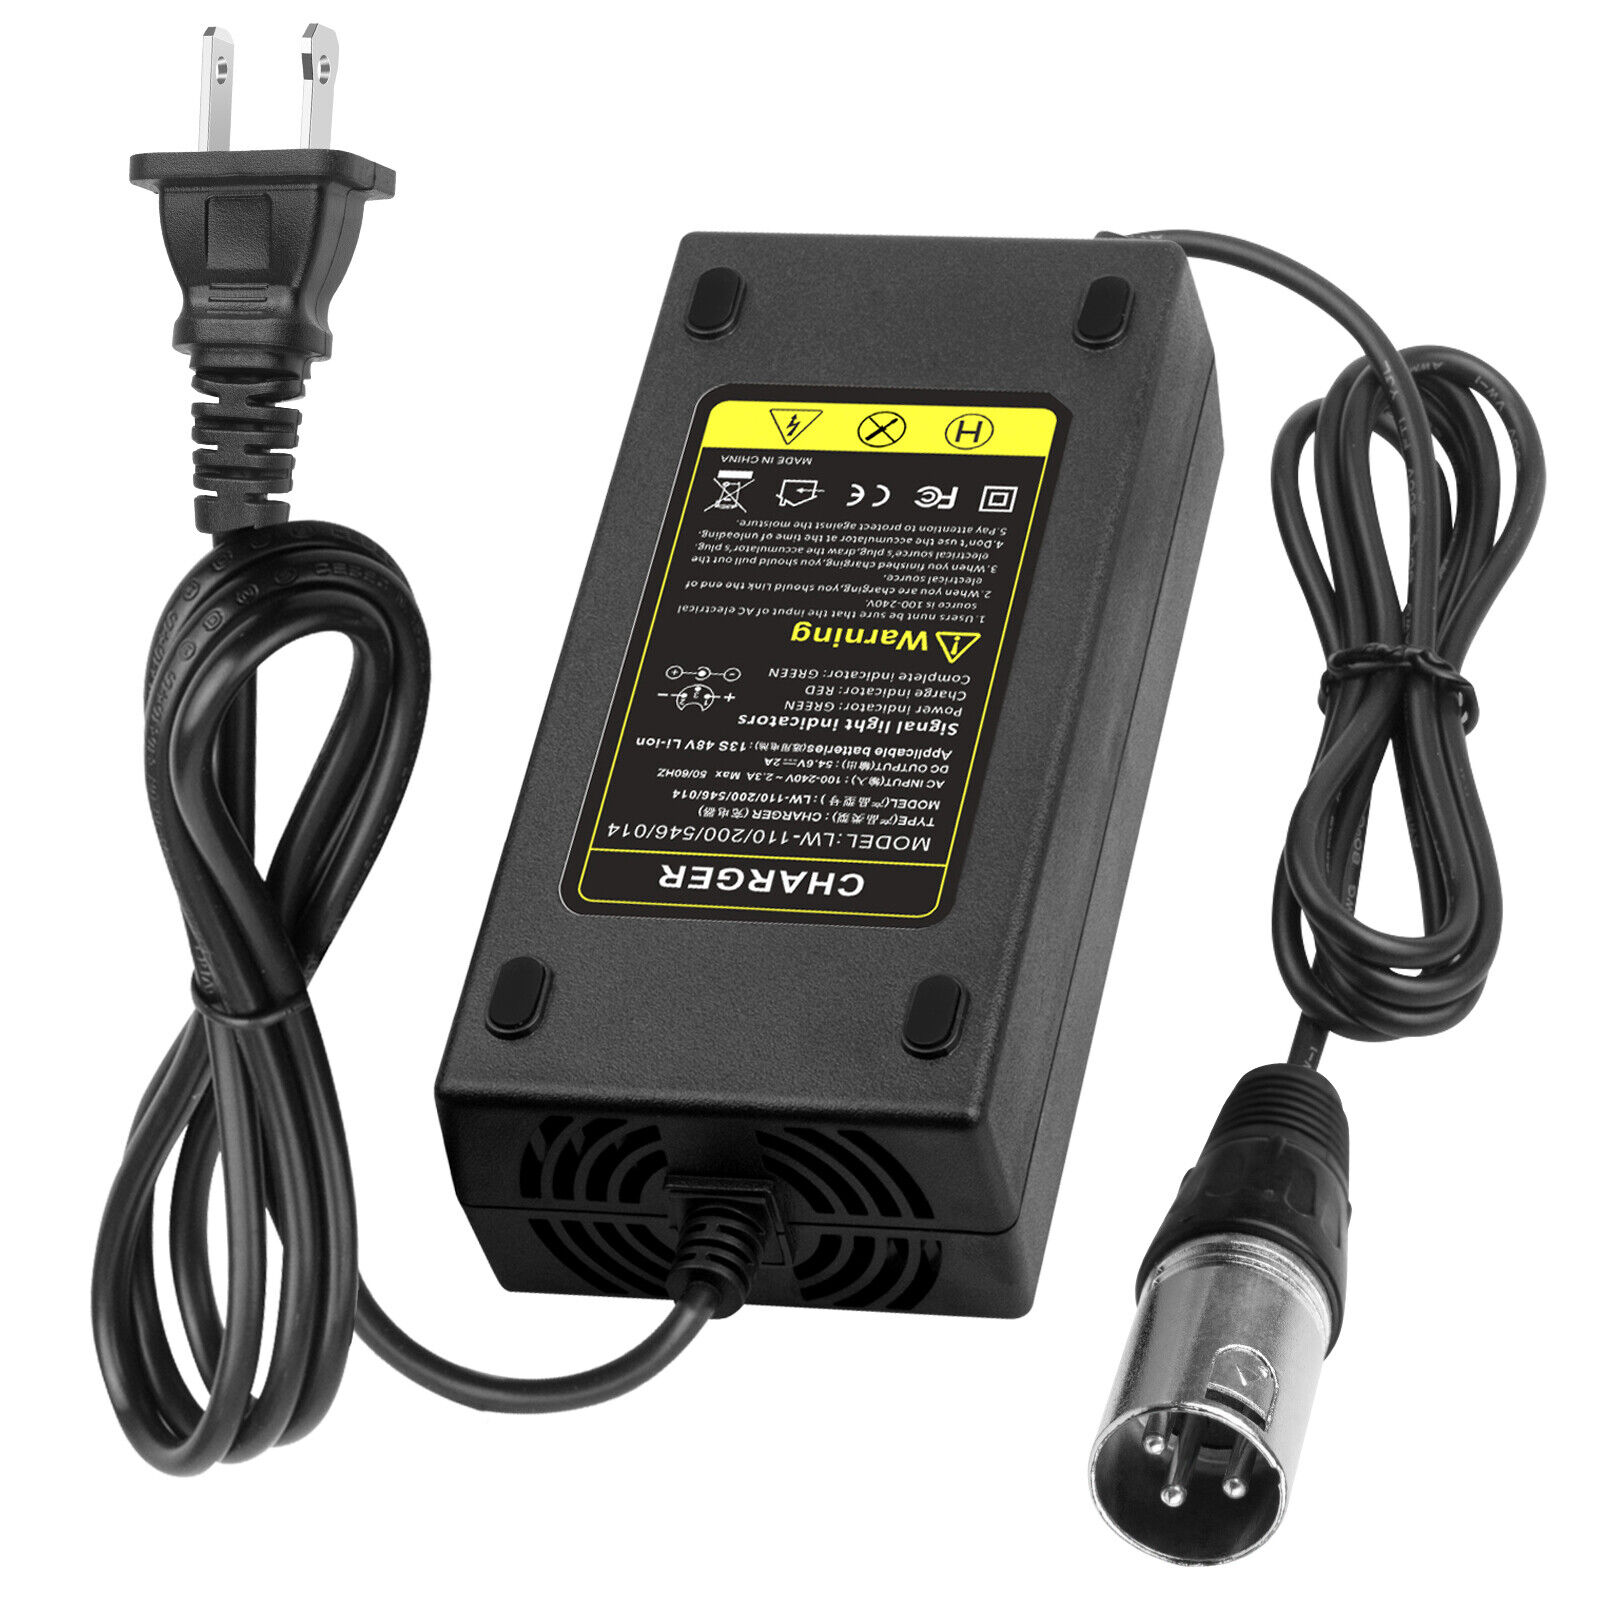 24V 2A-5A XLR Battery Charger for Mobility Pride Scooter Electric Wheelchair US 